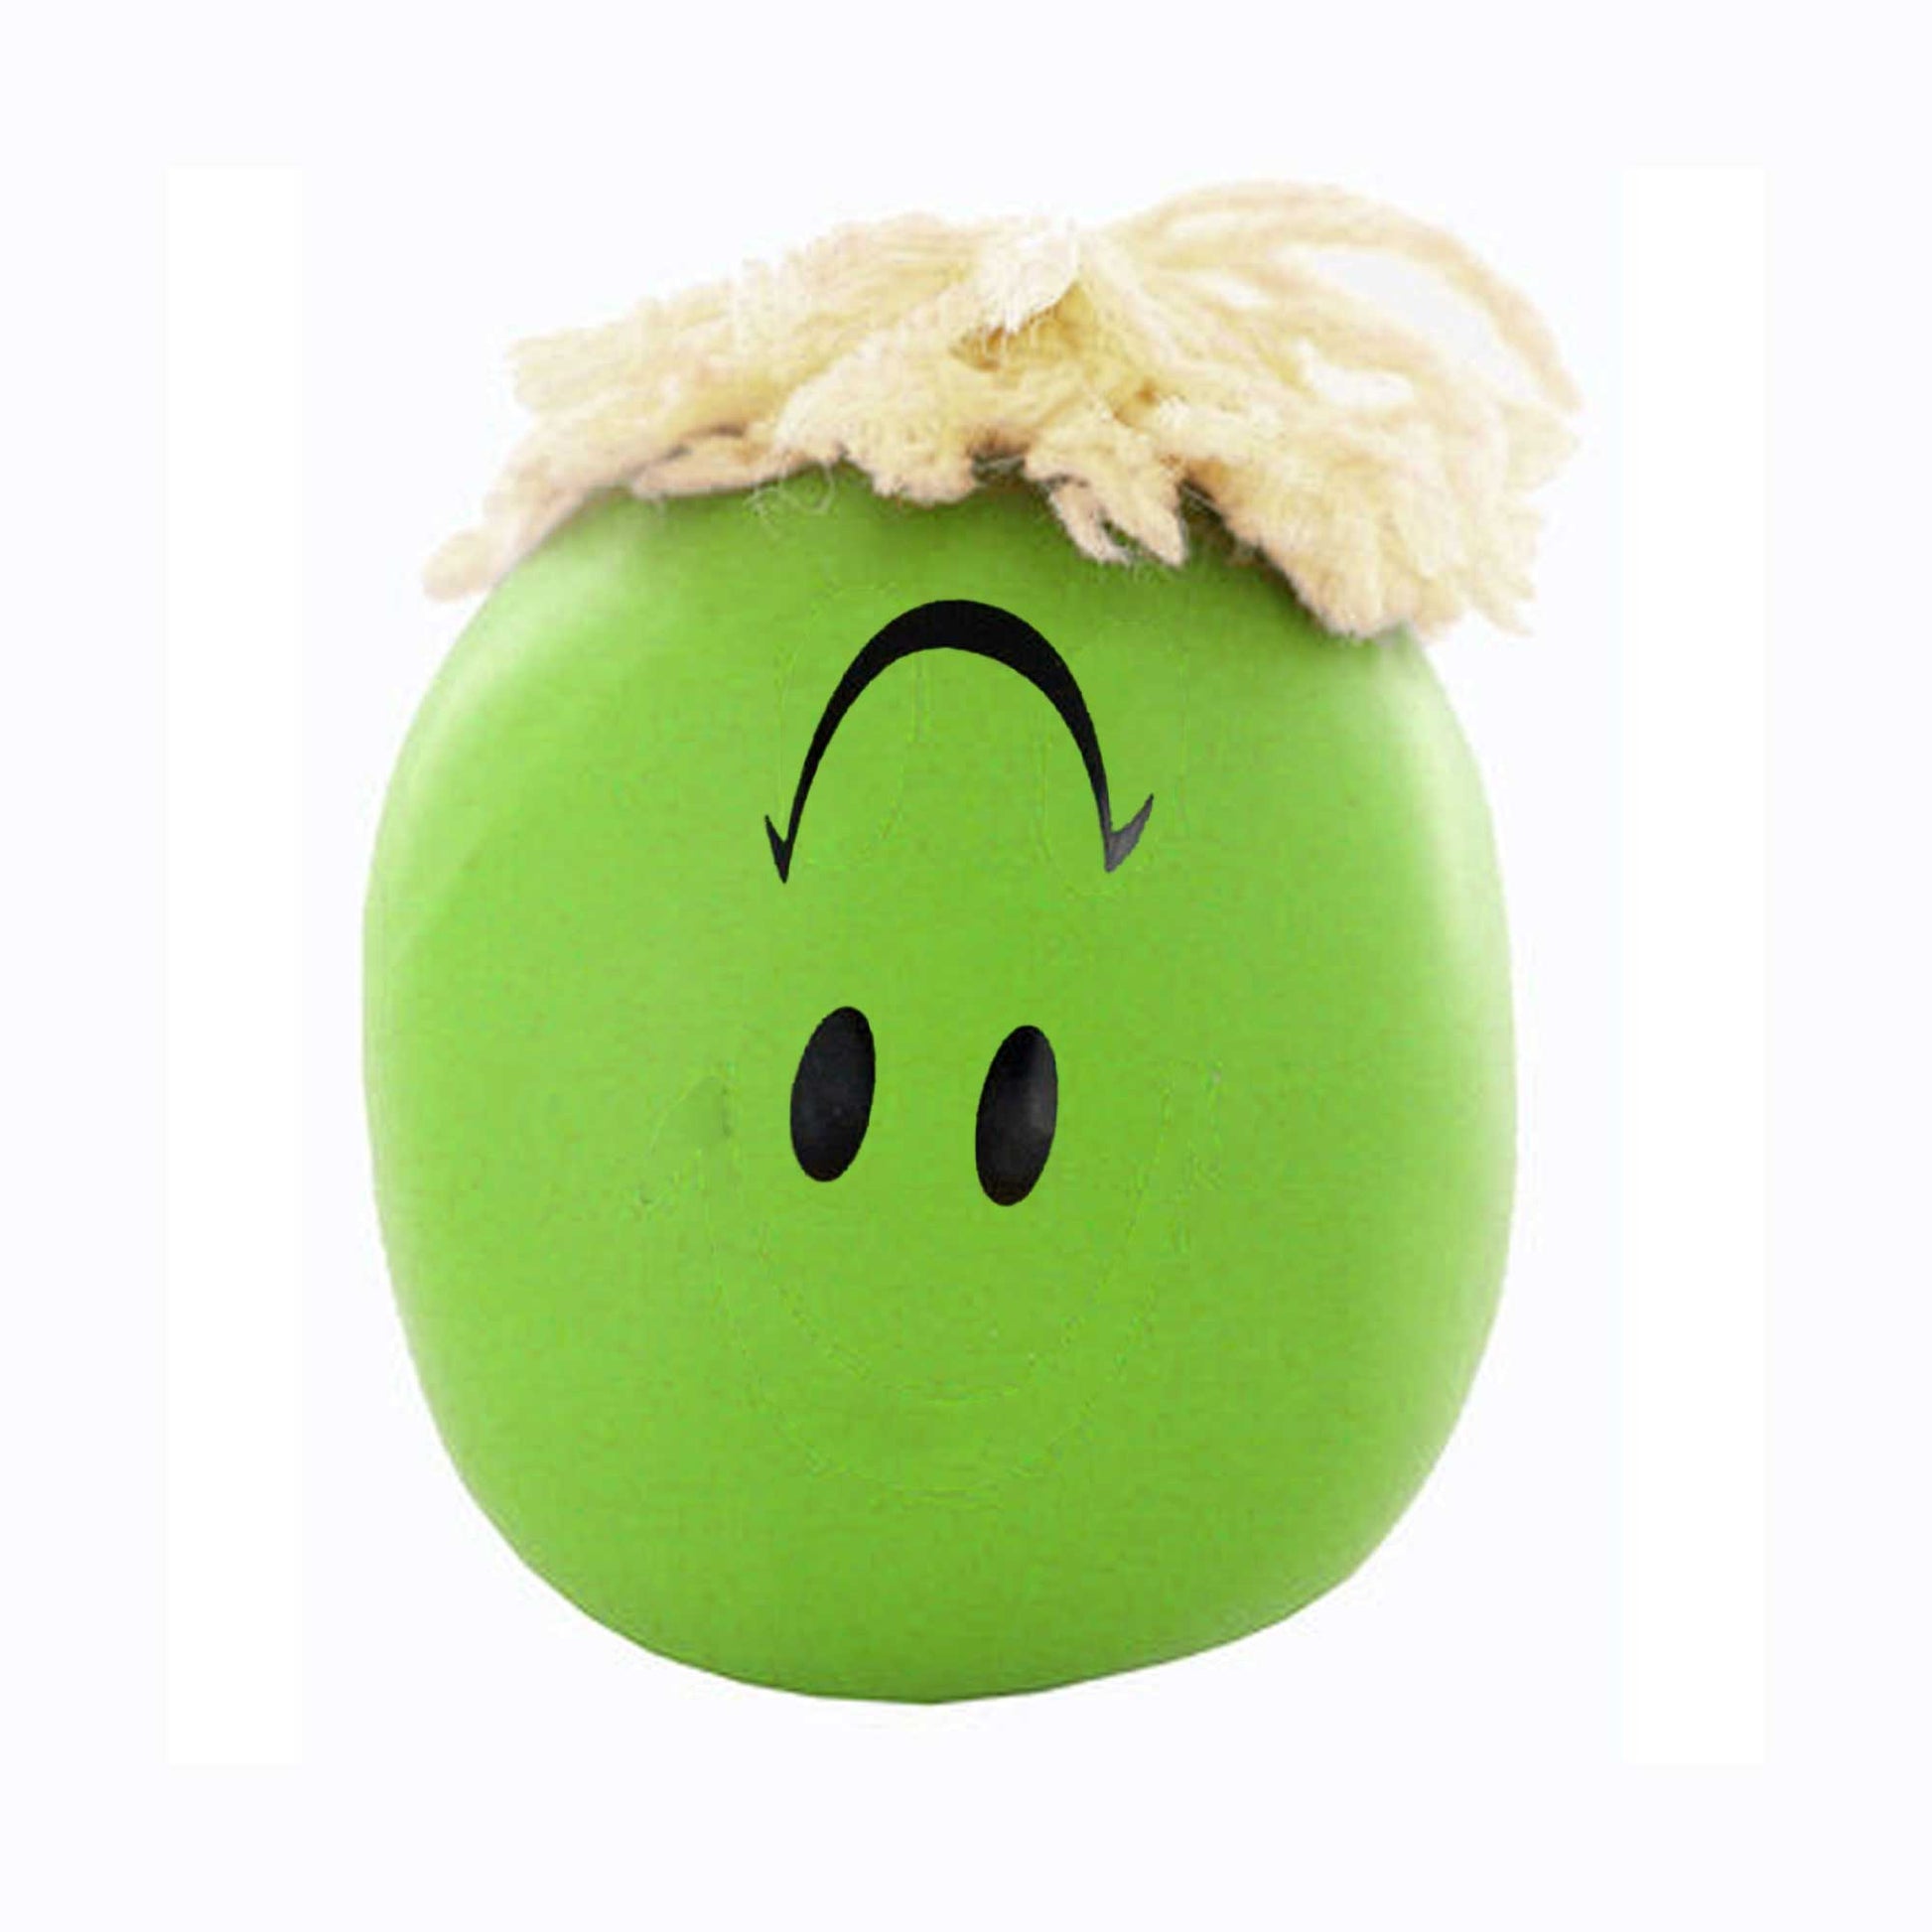 Kid's Moody Stress Relief Ball Face Anxiety Toy Toy SRL Green 